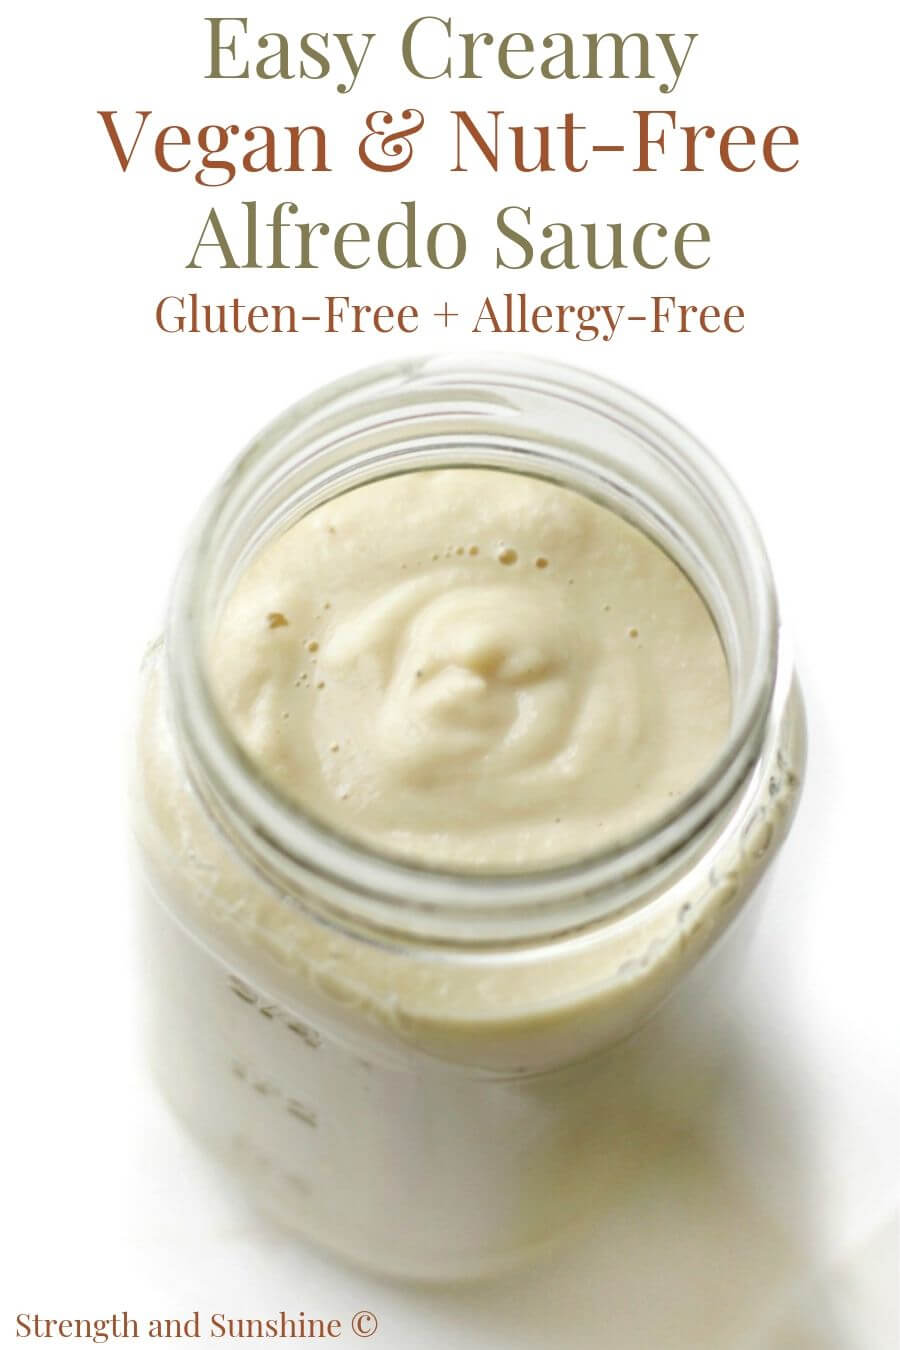 creamy vegan alfredo sauce in a a glass jar with image text